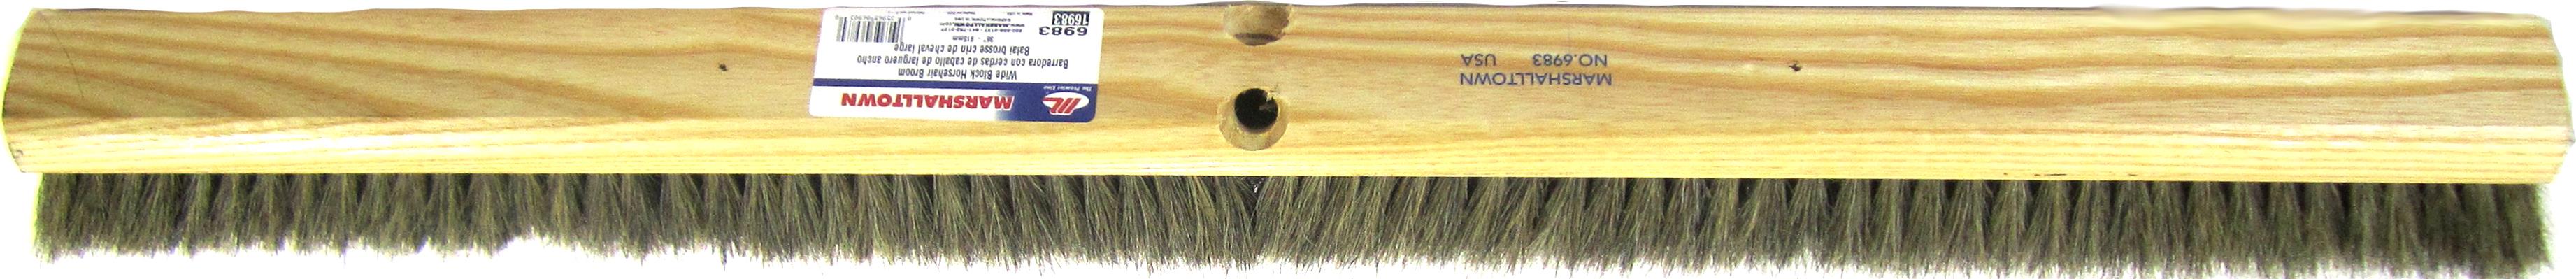 Concrete Broom 36" with Horsehair Bristles on Lacquered Hardwood Block